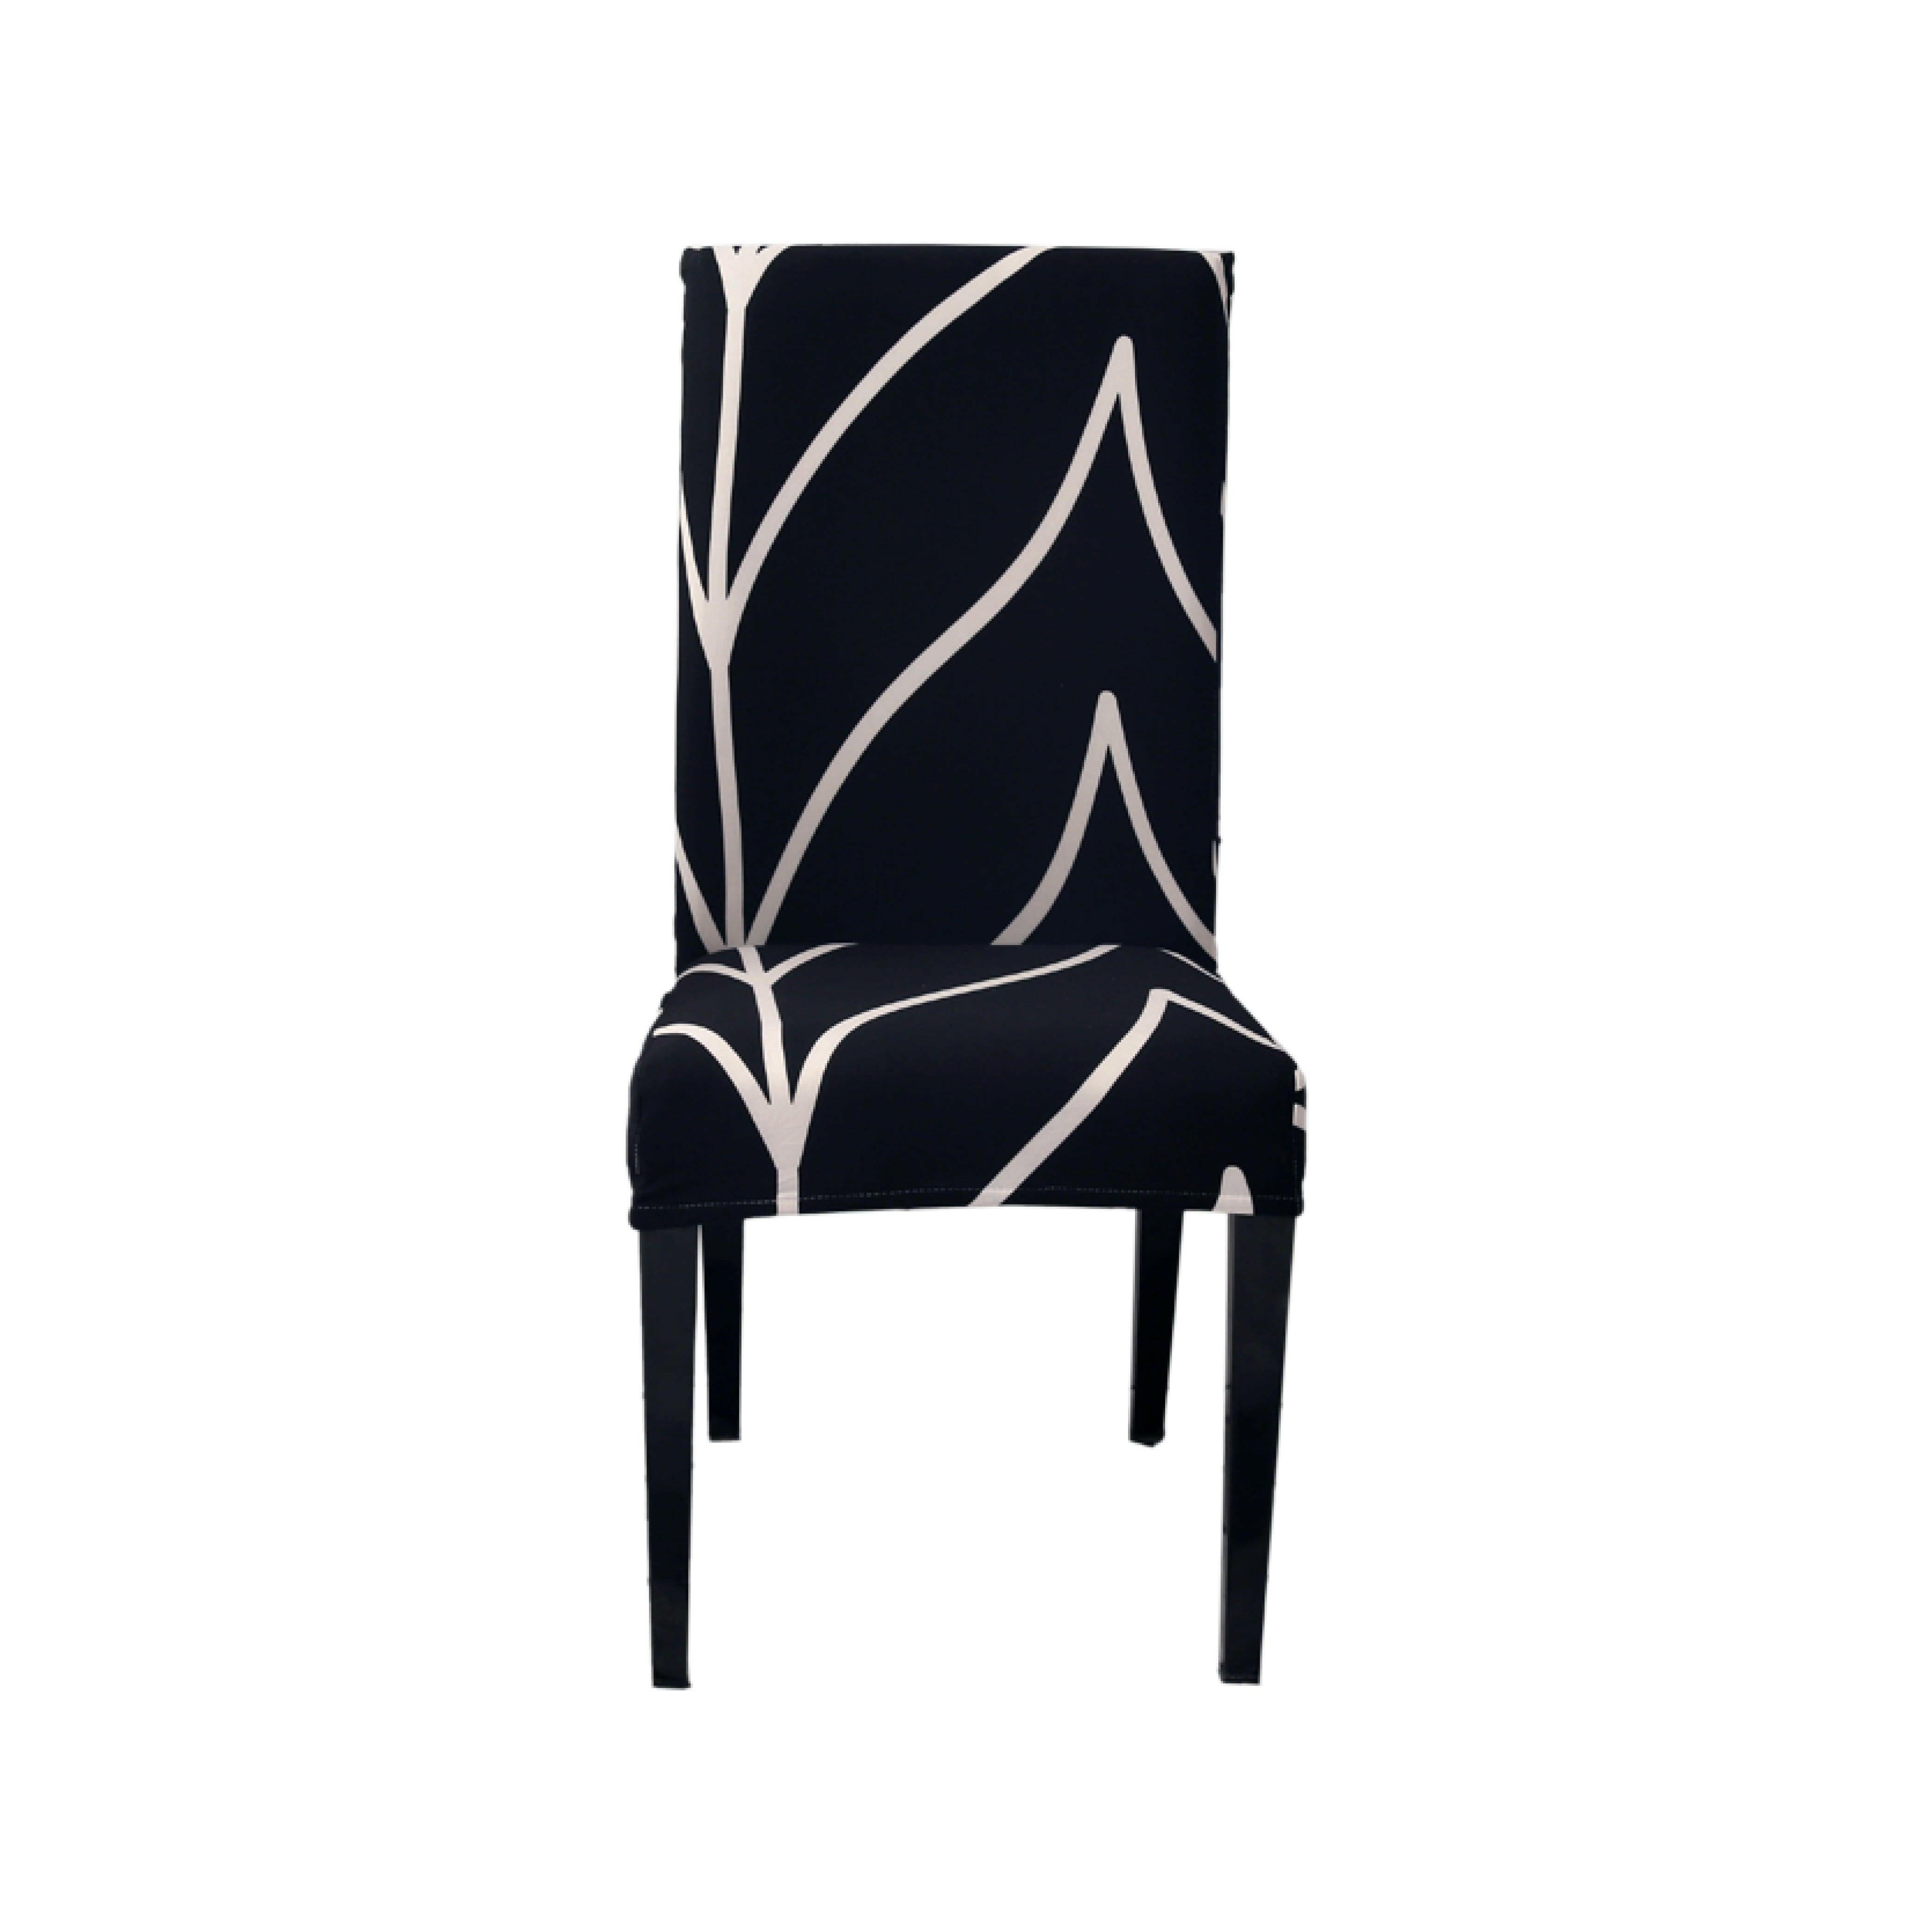 Hyper Cover Stretch Dining Chair Covers with Patterns Black Tone | Chair Covers | Brilliant Home Living